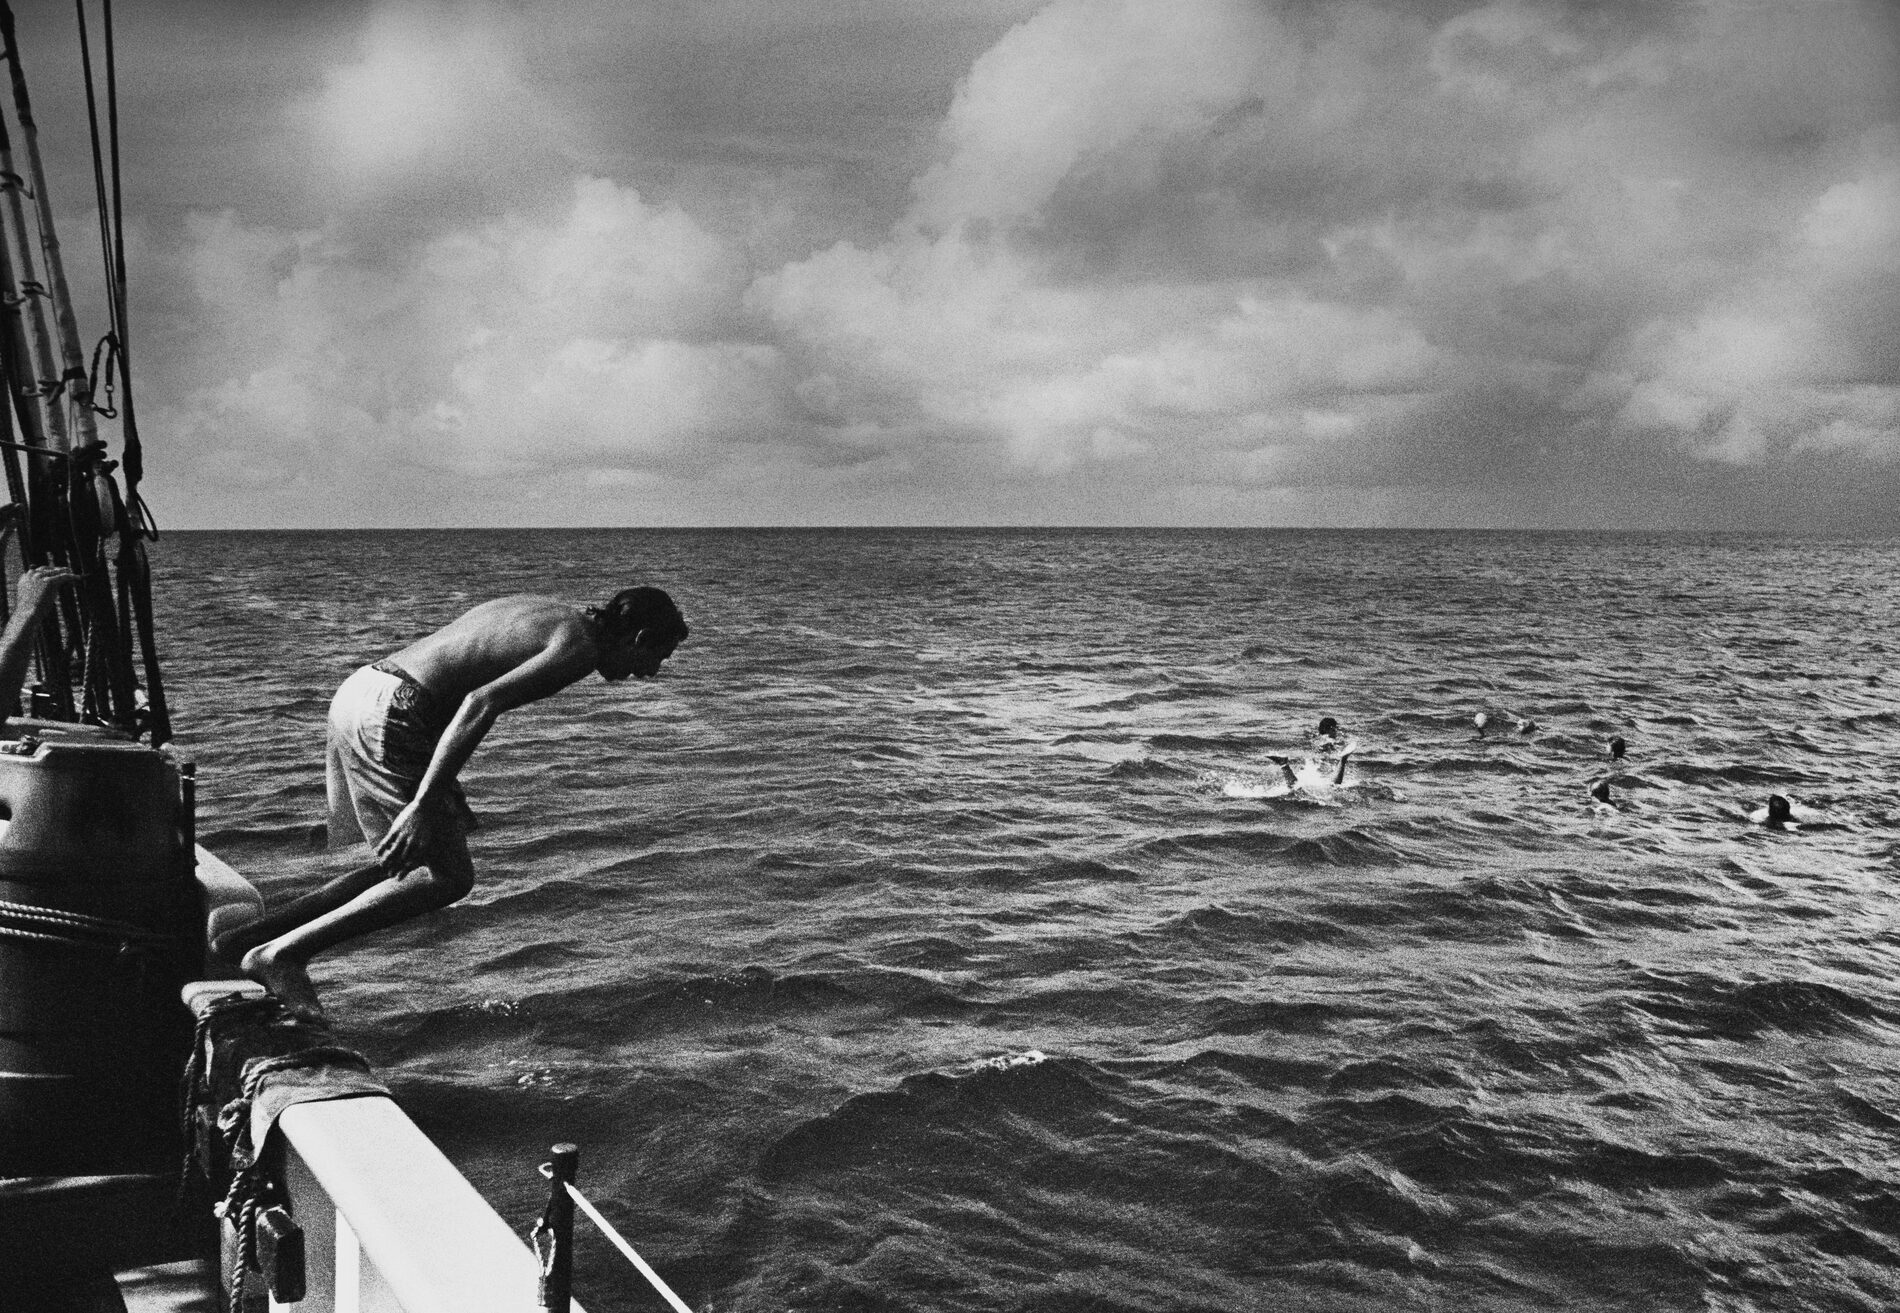 Black and white: a man in a swim suit jumps off the side of a boat. About 10 meters away, someone is in the water with their feet sticking up.